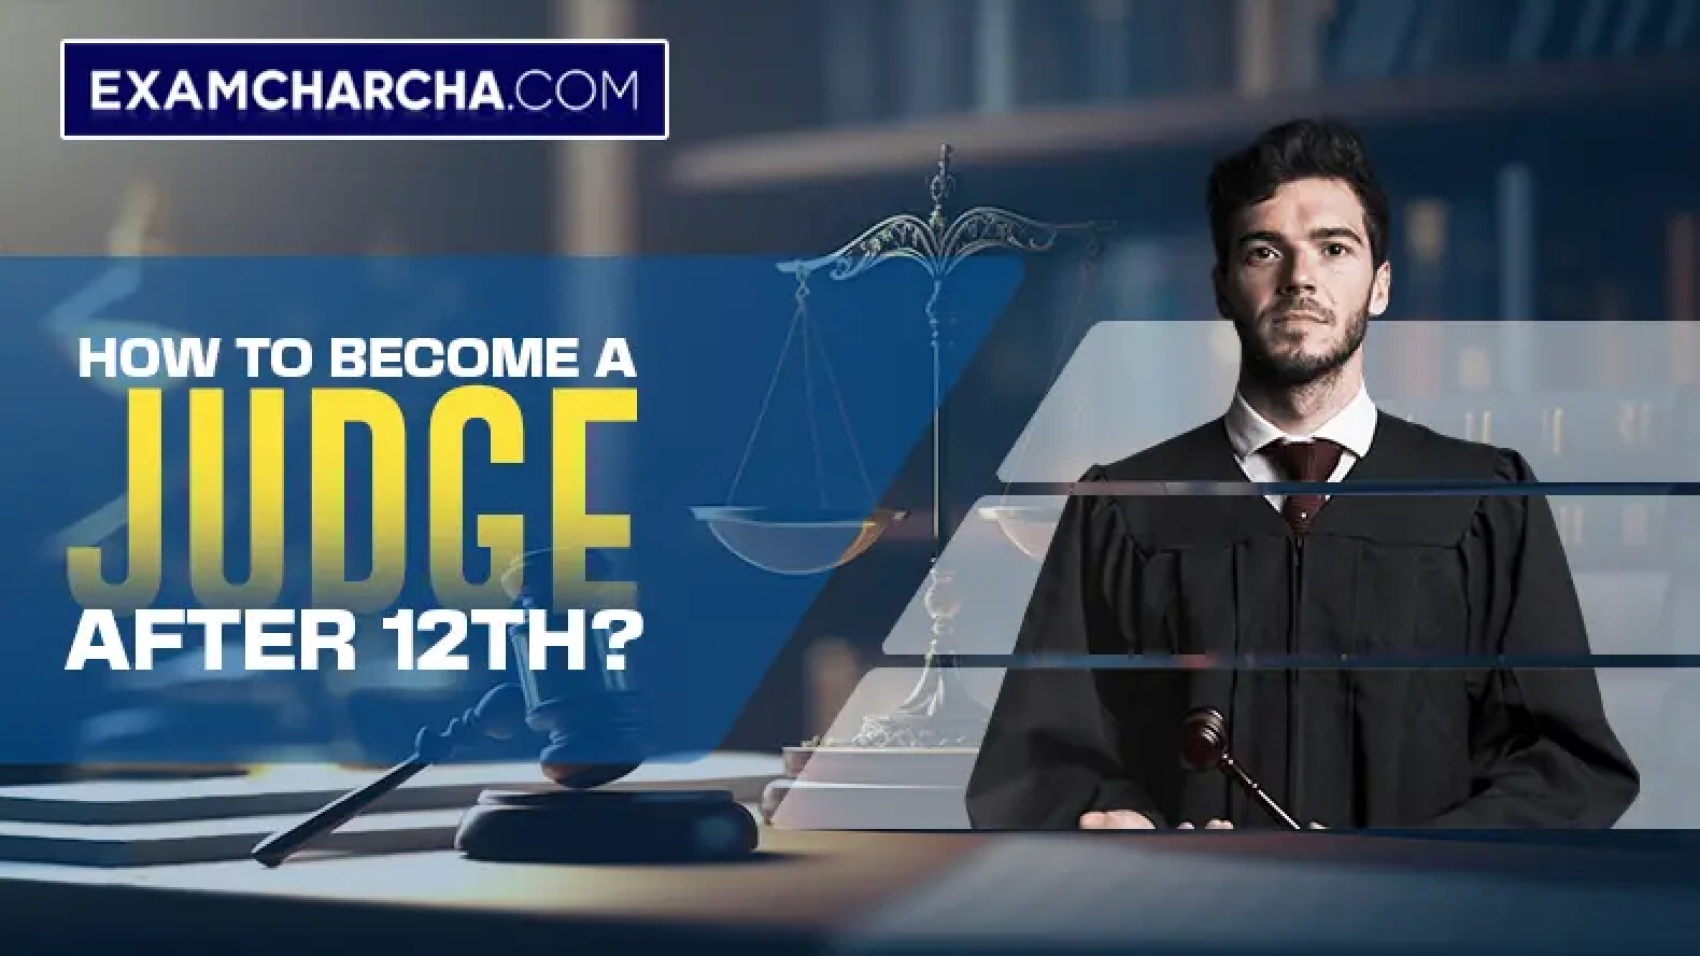 How to Become Judge After 12th